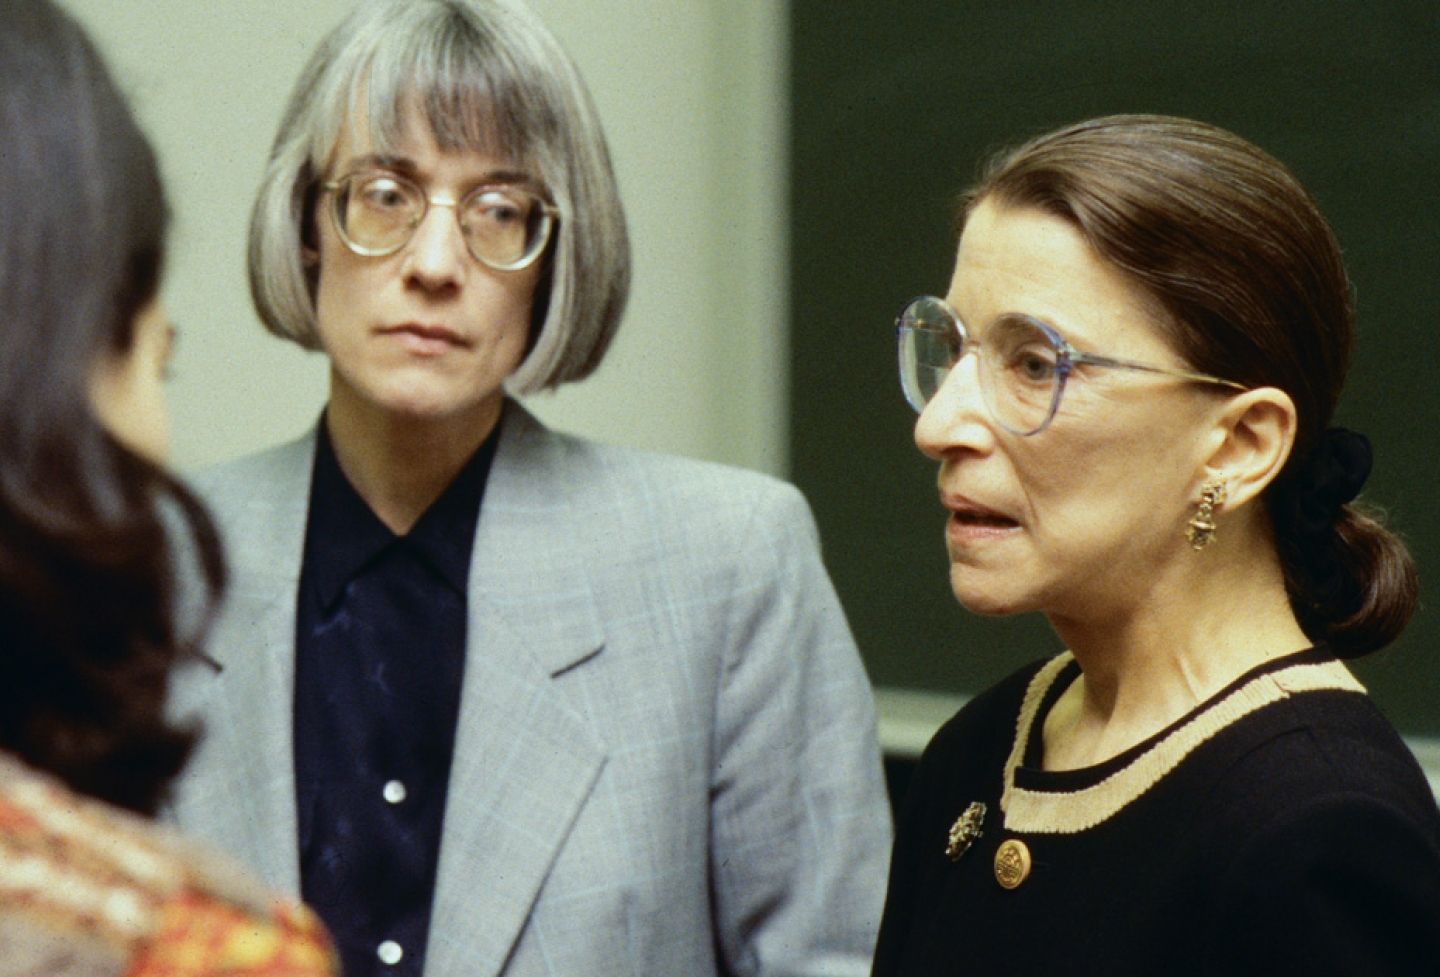 Ruth Bader Ginsburg speaks to Anne Coughlin's class in 1997.